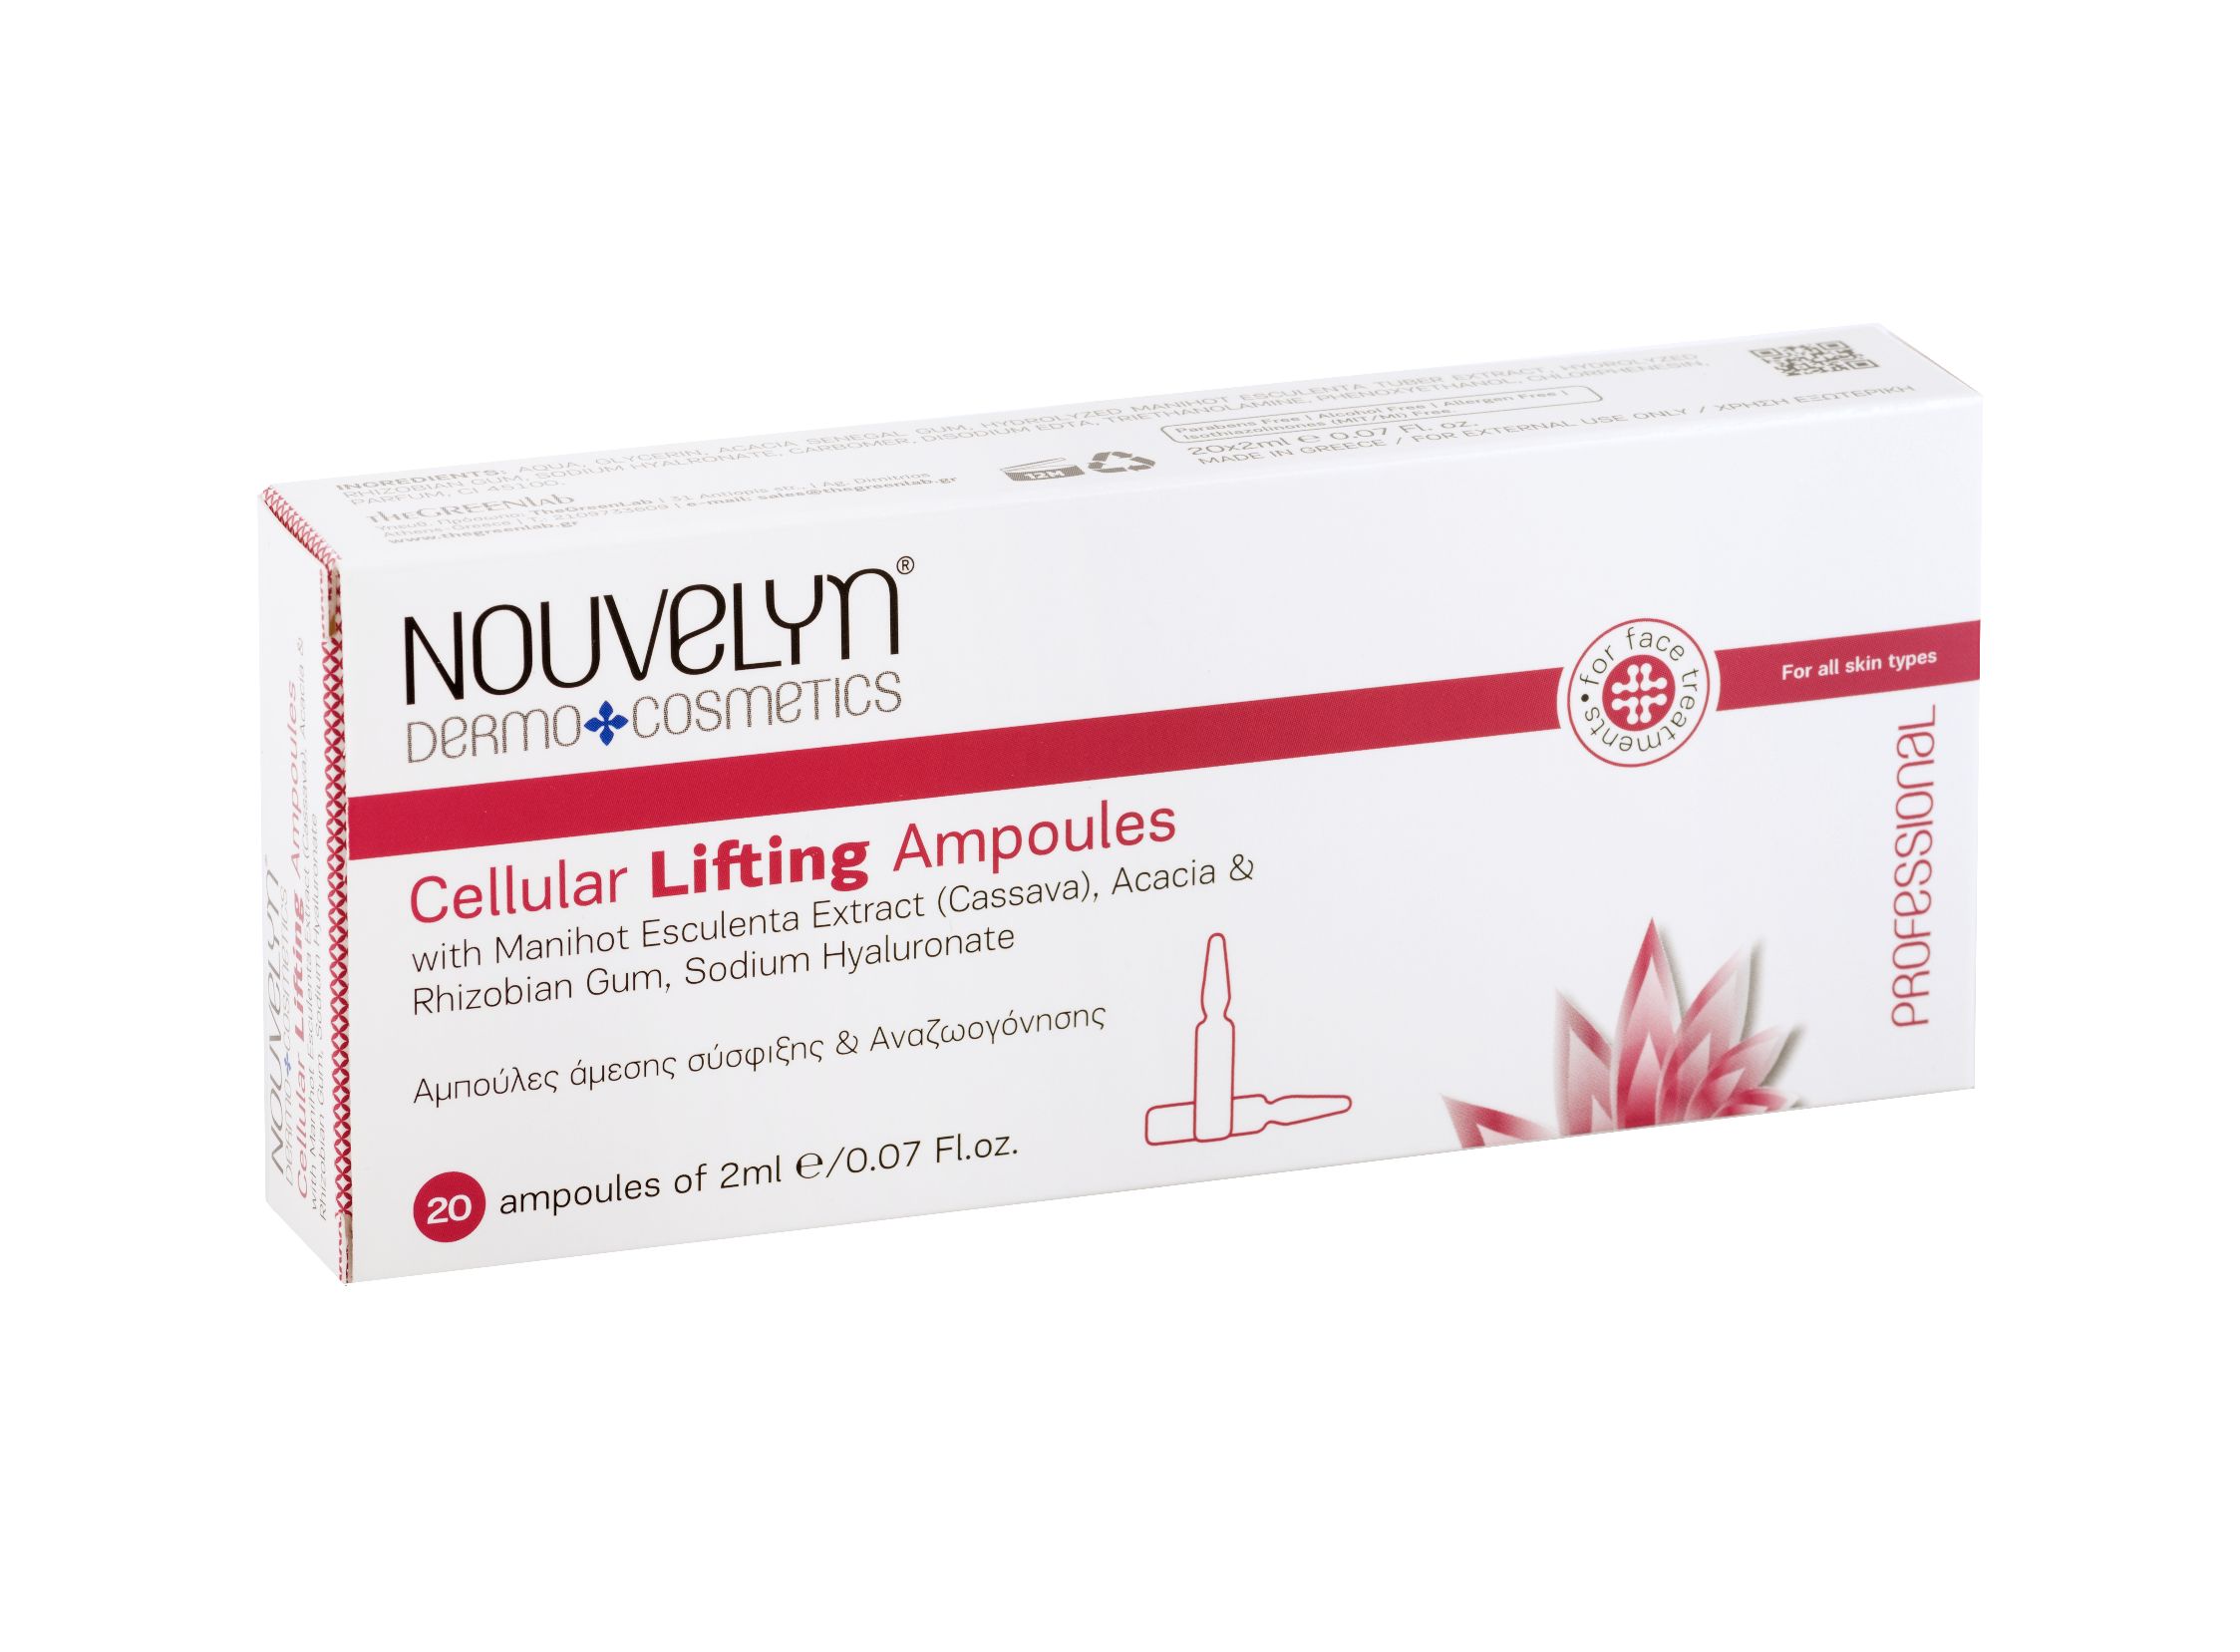 “CELLULAR LIFTING AMPOULES" 20x2ml